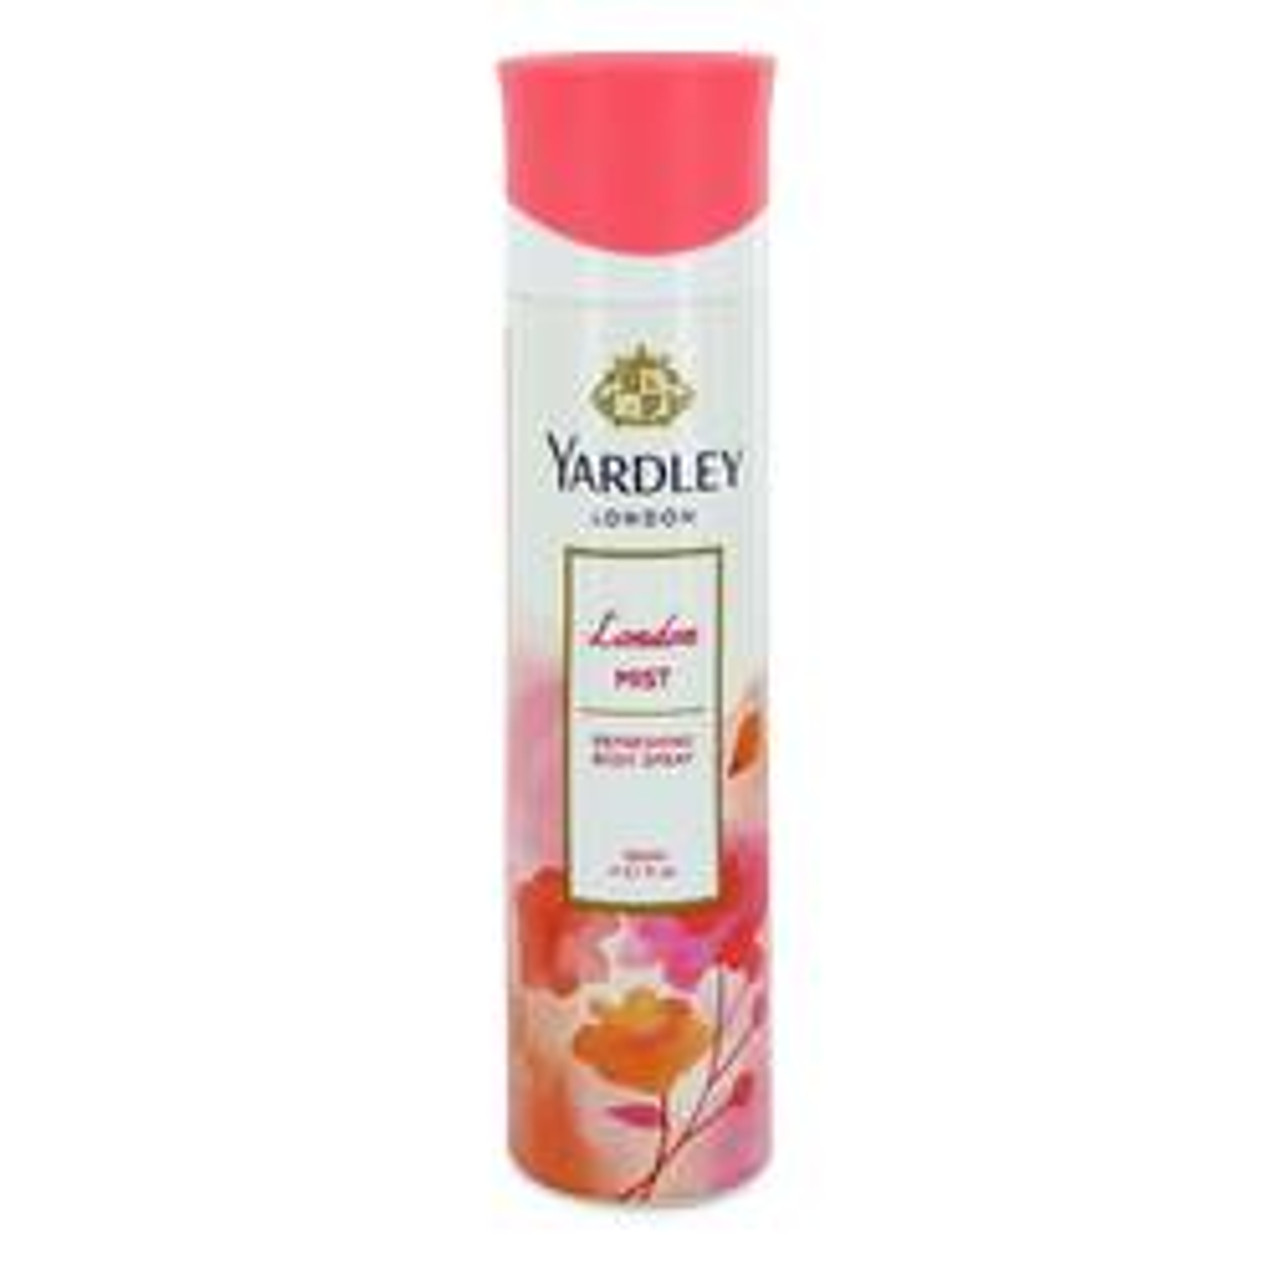 London Mist Perfume By Yardley London Refreshing Body Spray 5 oz for Women - [From 31.00 - Choose pk Qty ] - *Ships from Miami